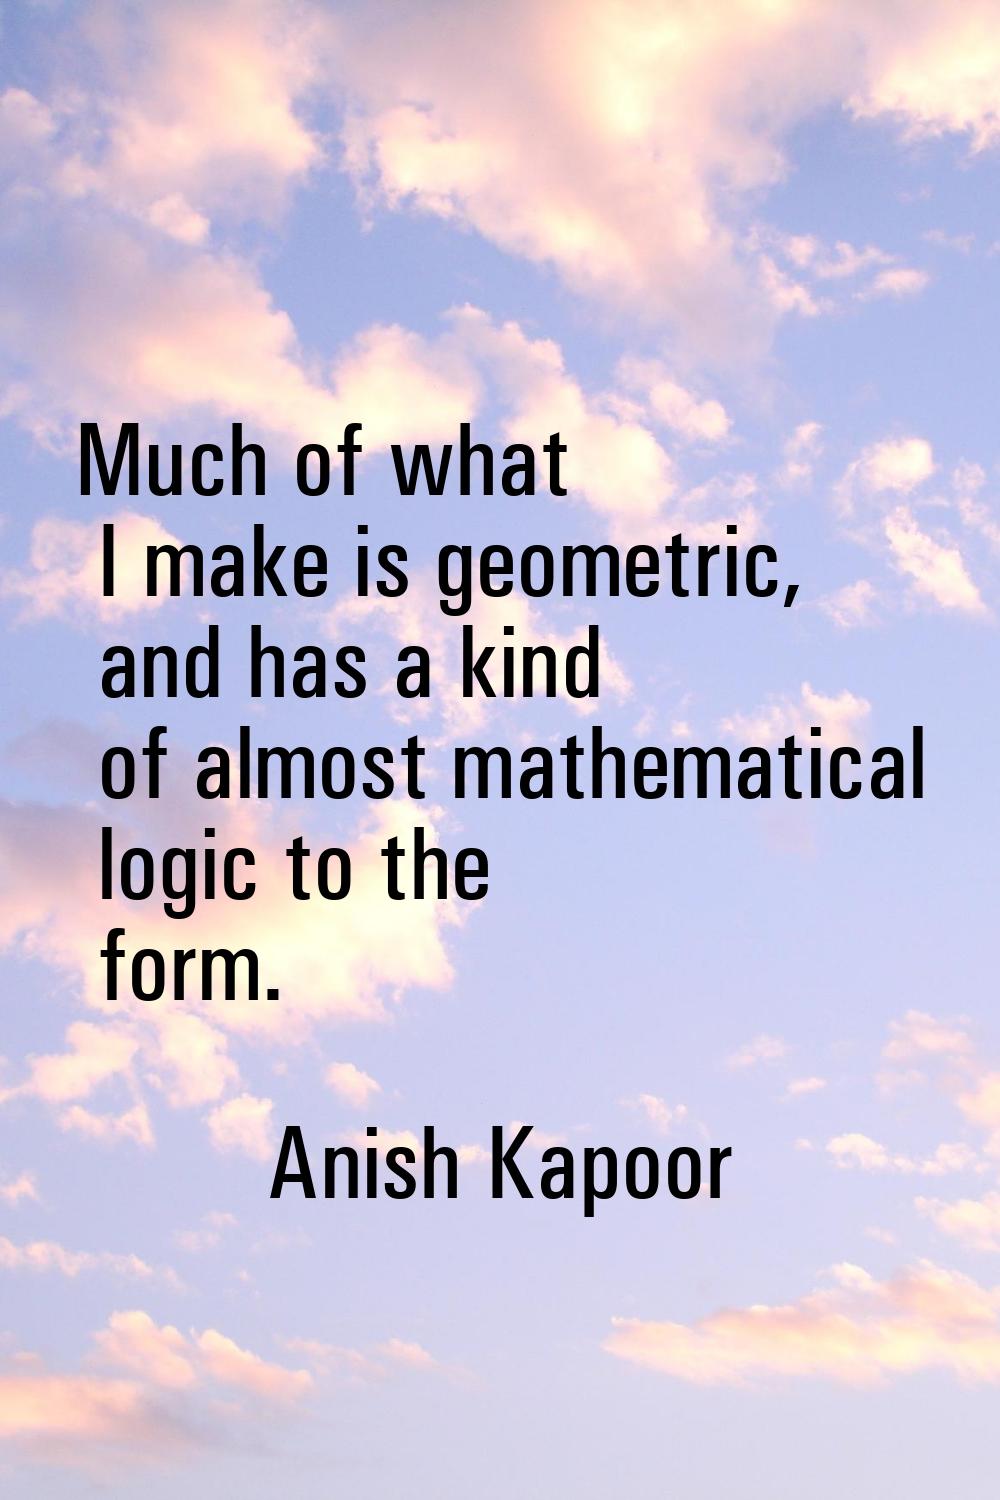 Much of what I make is geometric, and has a kind of almost mathematical logic to the form.